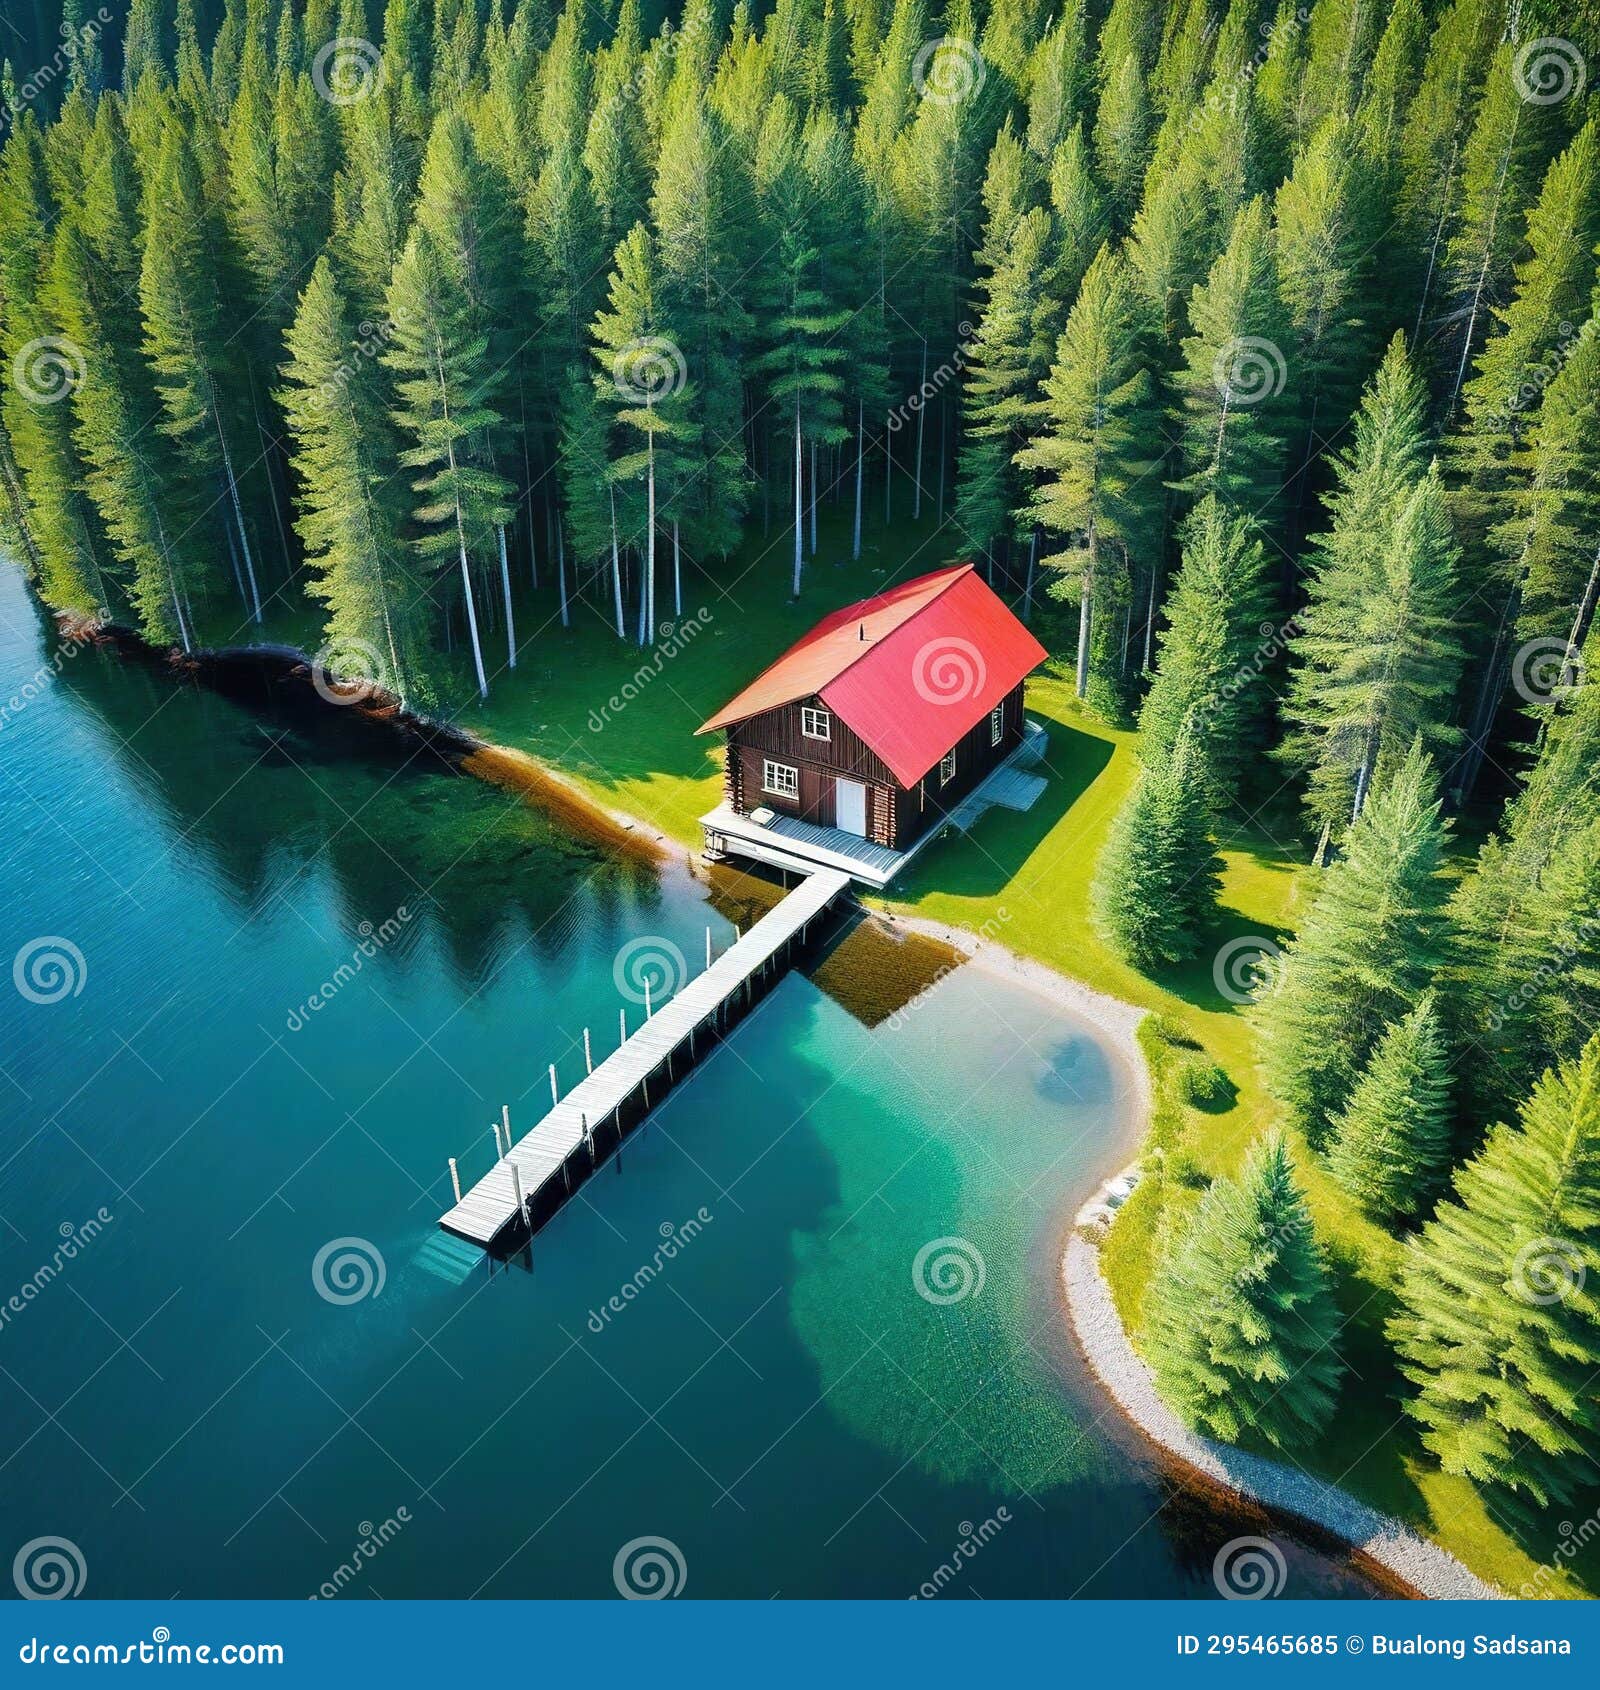 Aerial View of a Wooden Cabin in a Pine Forest beside a Lake in Rural ...